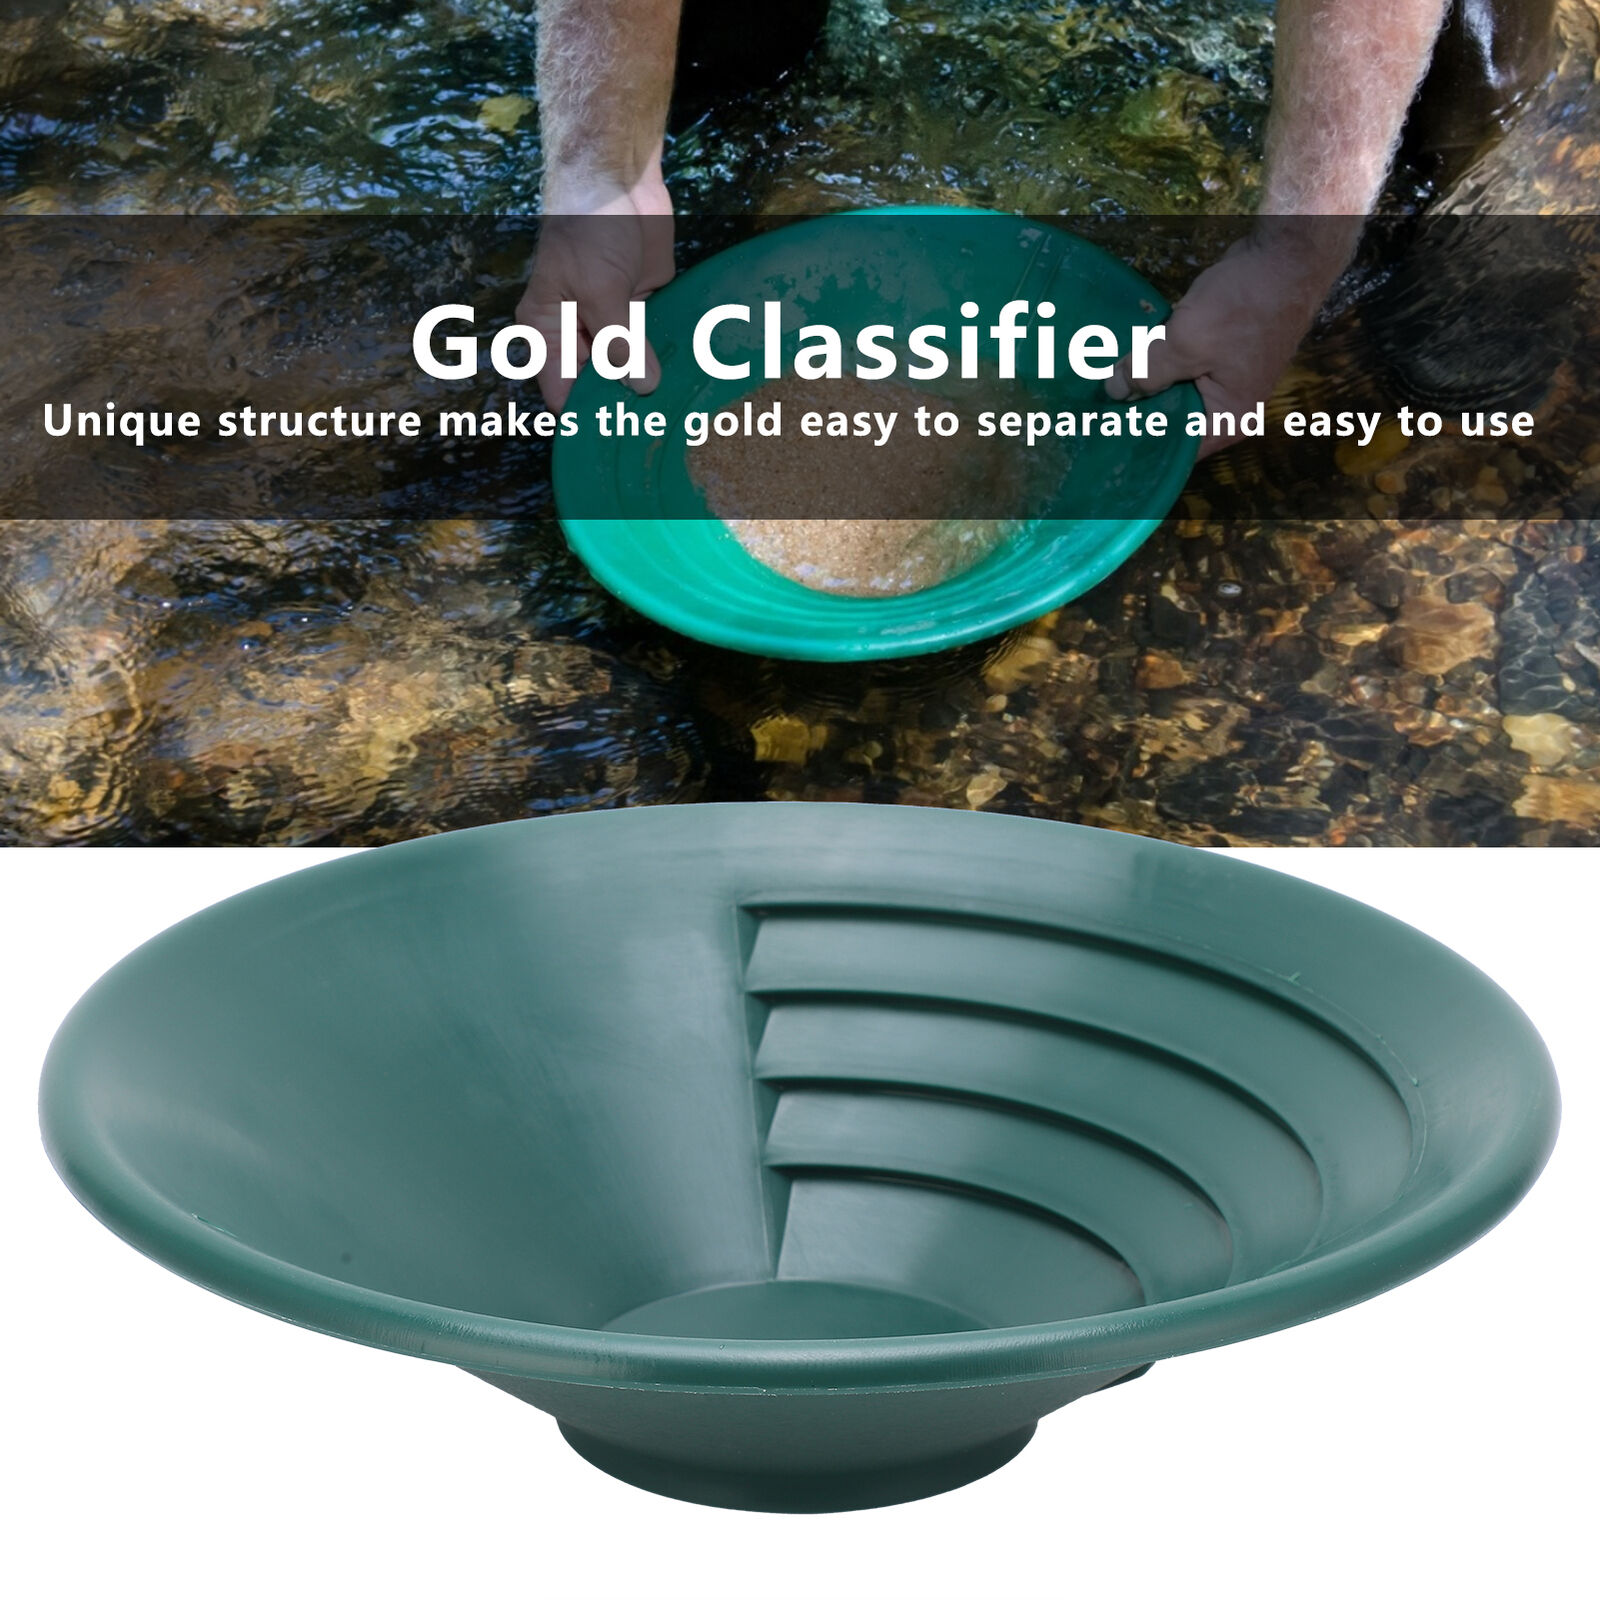 260mm Gold Panning Pan ABS Gold Sifting Classifier Washing Sieve Tray - Green